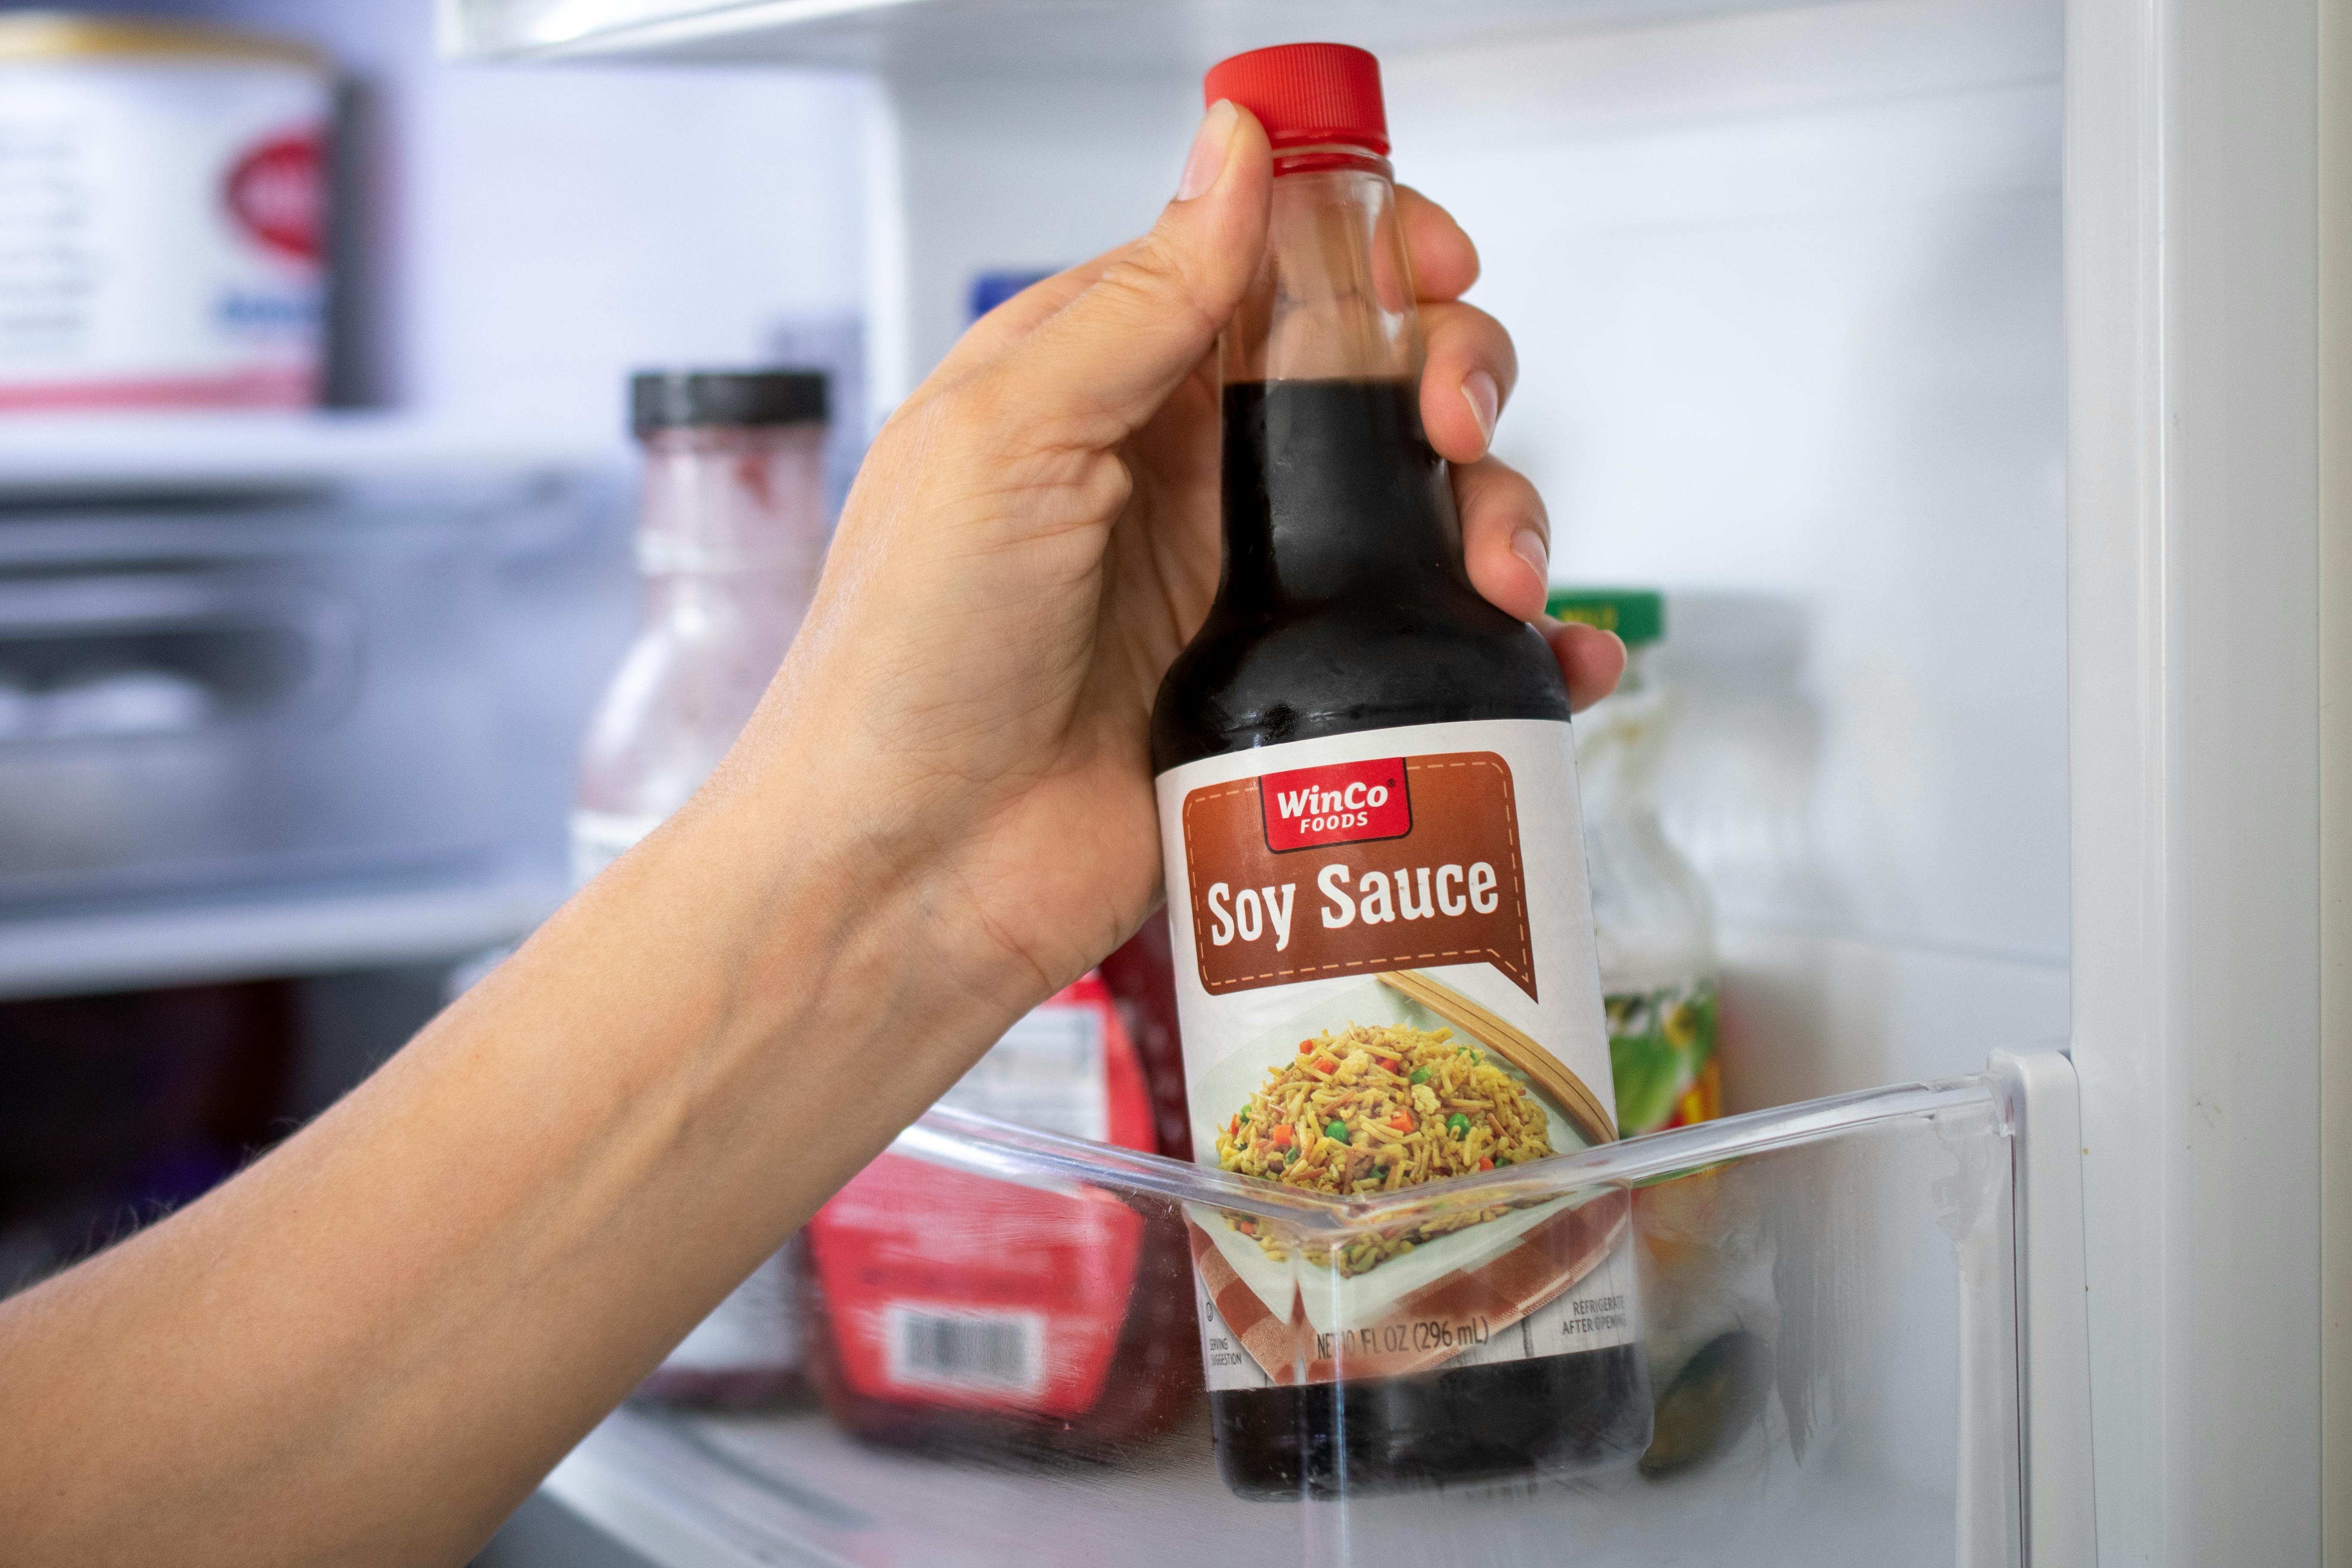 A person pulling a bottle of soy sauce from the fridge